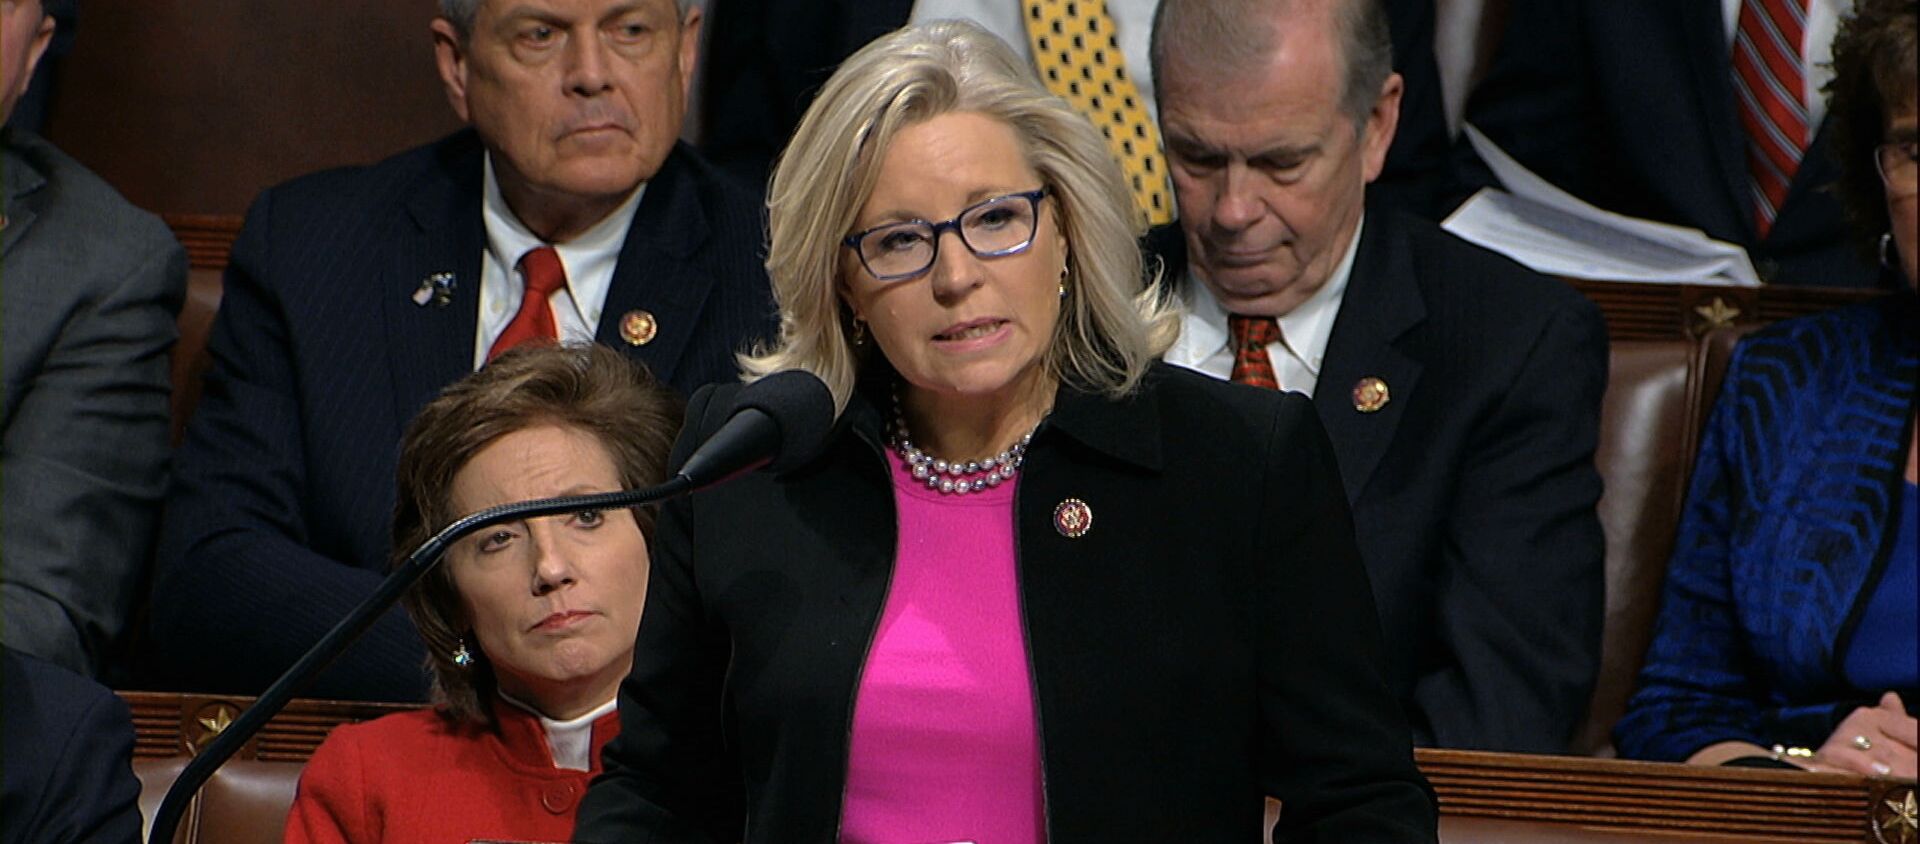 Rep. Liz Cheney, R-Wyo., speaks as the House of Representatives debates the articles of impeachment against President Donald Trump at the Capitol in Washington, Wednesday, Dec. 18, 2019. - Sputnik International, 1920, 05.05.2021